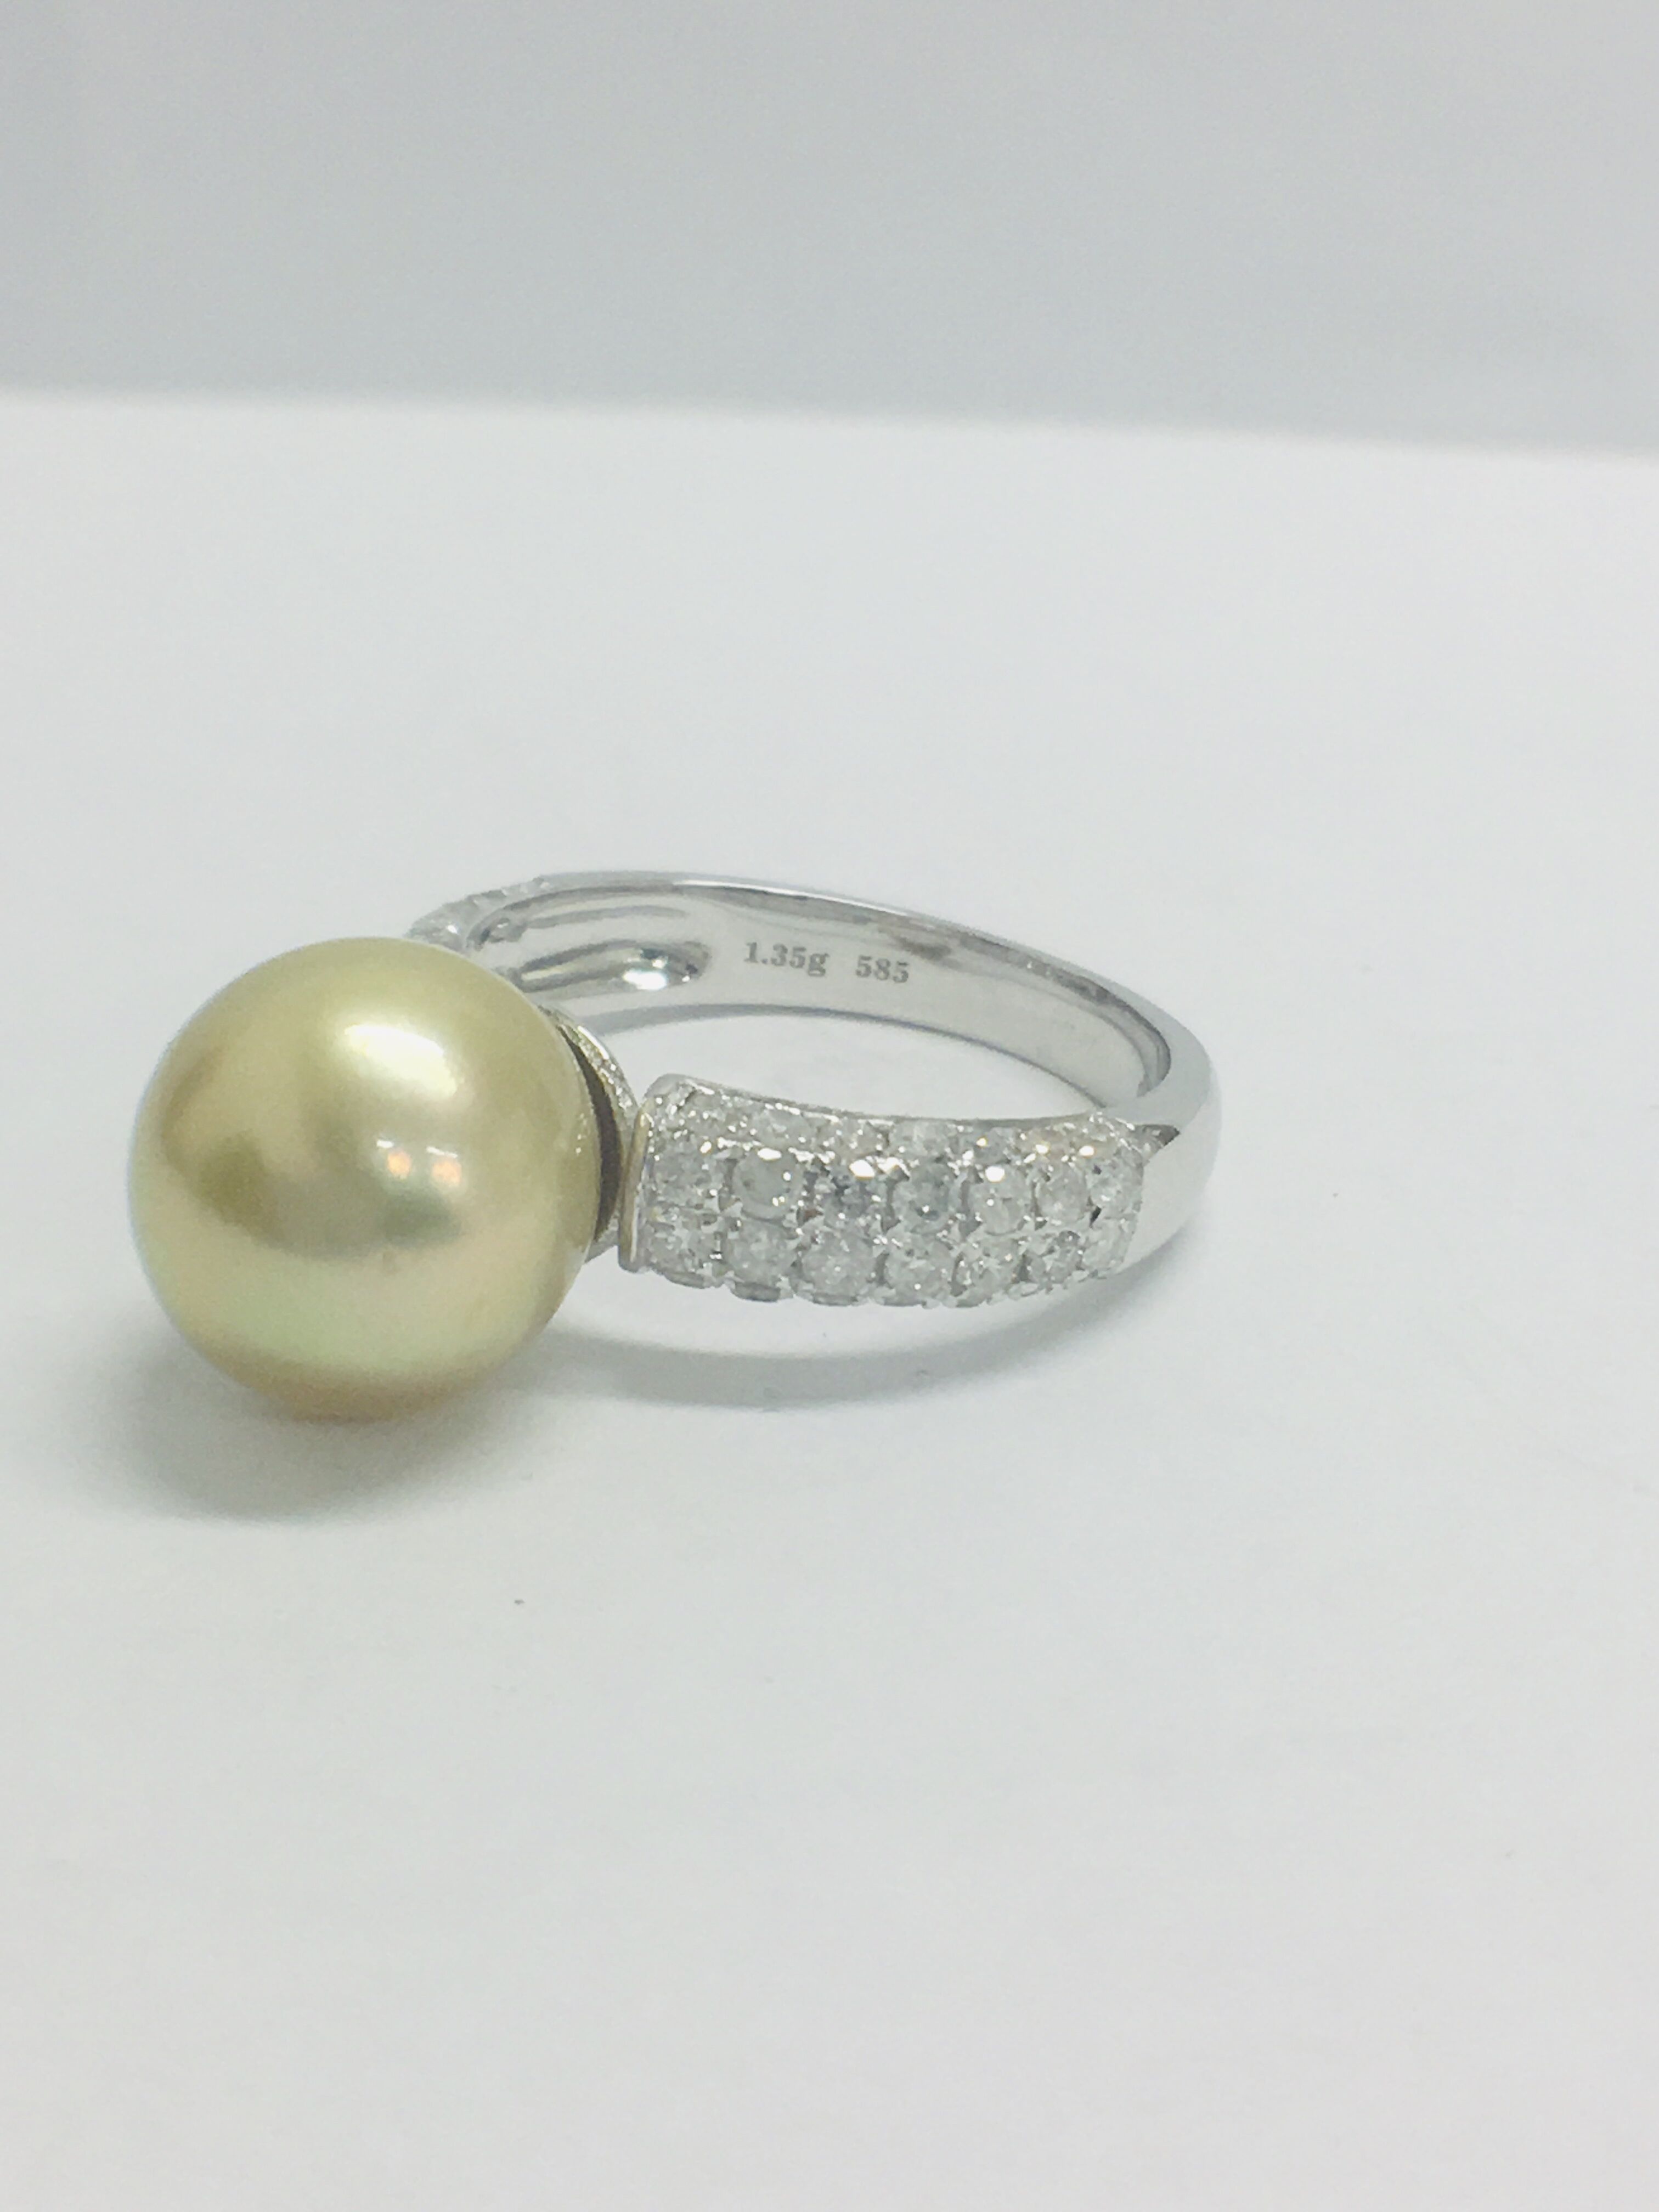 14ct White Gold Pearl & Diamond Ring - Image 4 of 11